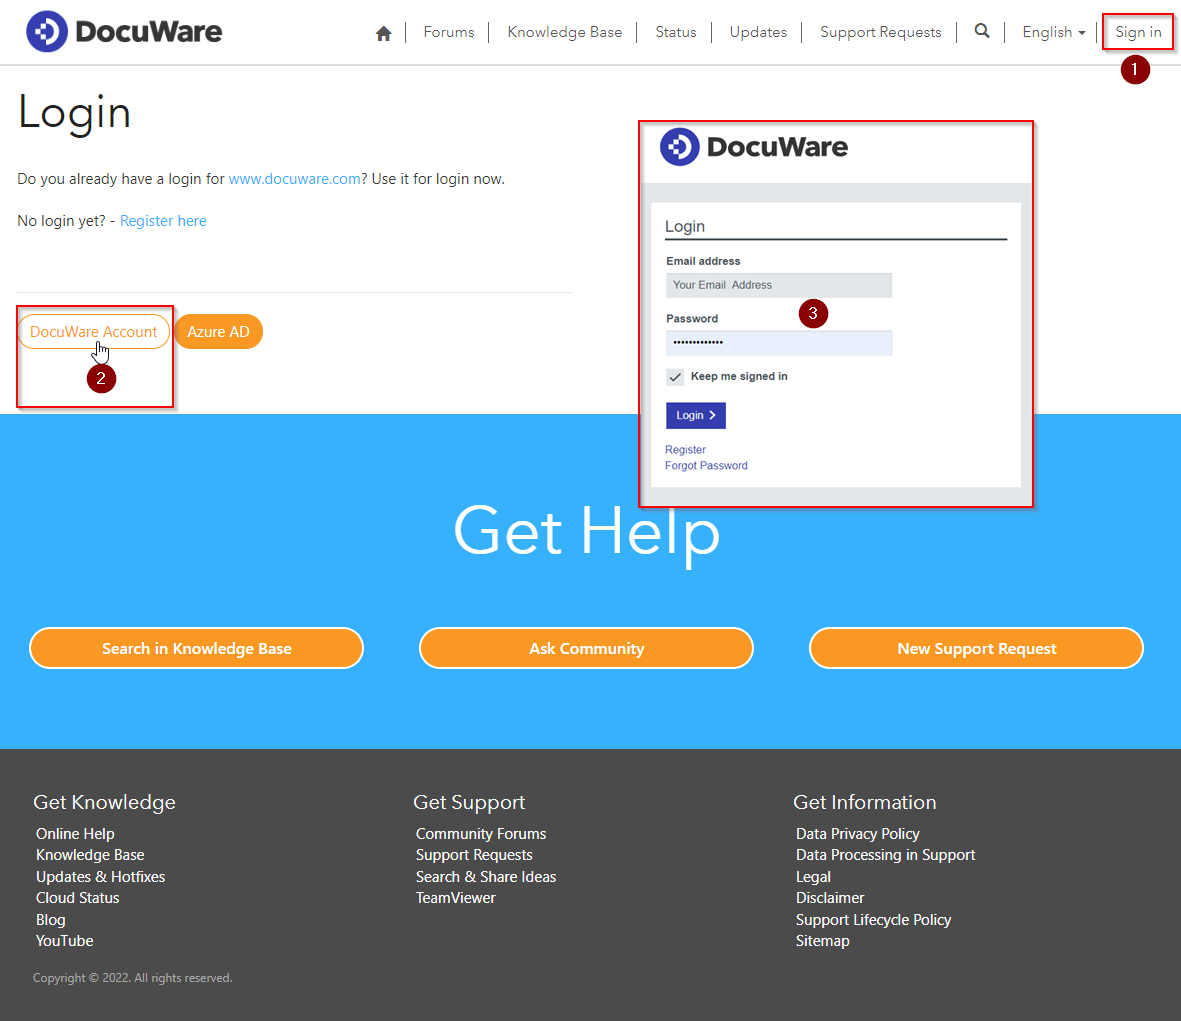 Login at support.docuware.com